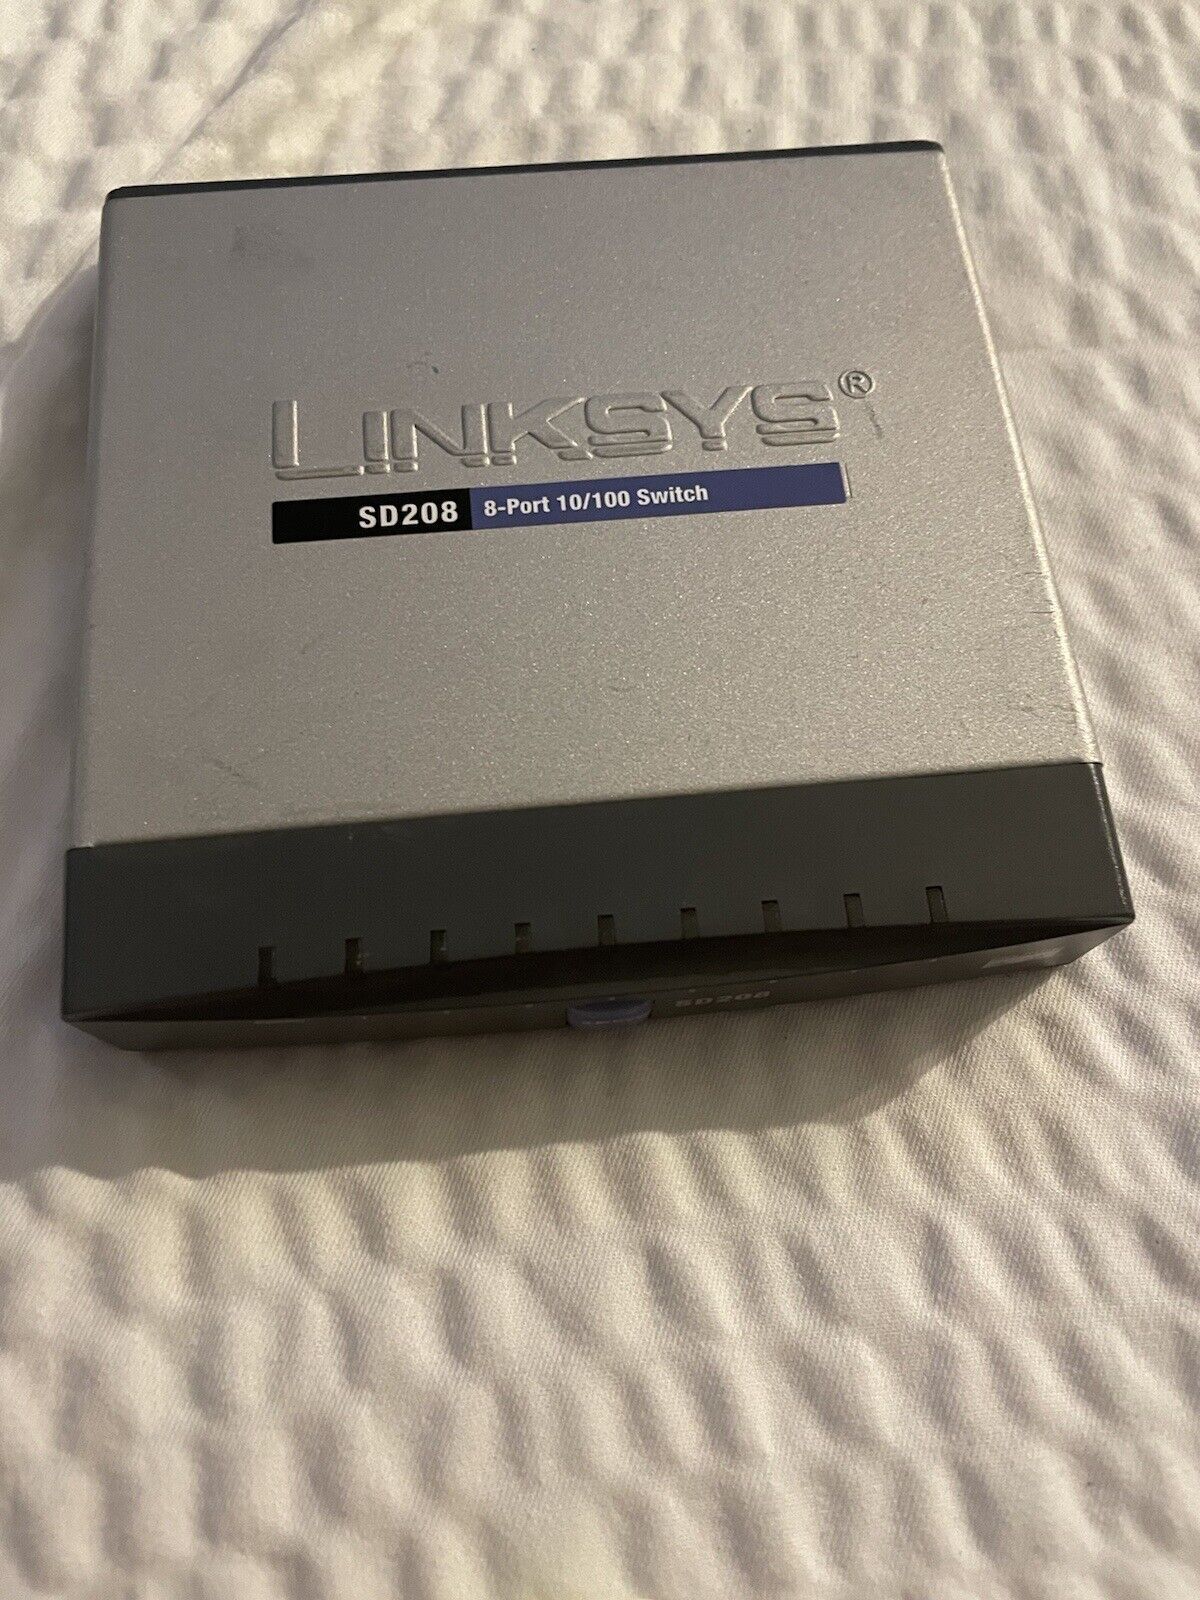 Linksys SD208 8-port 10/100 Switch No Power Adapter AS IS